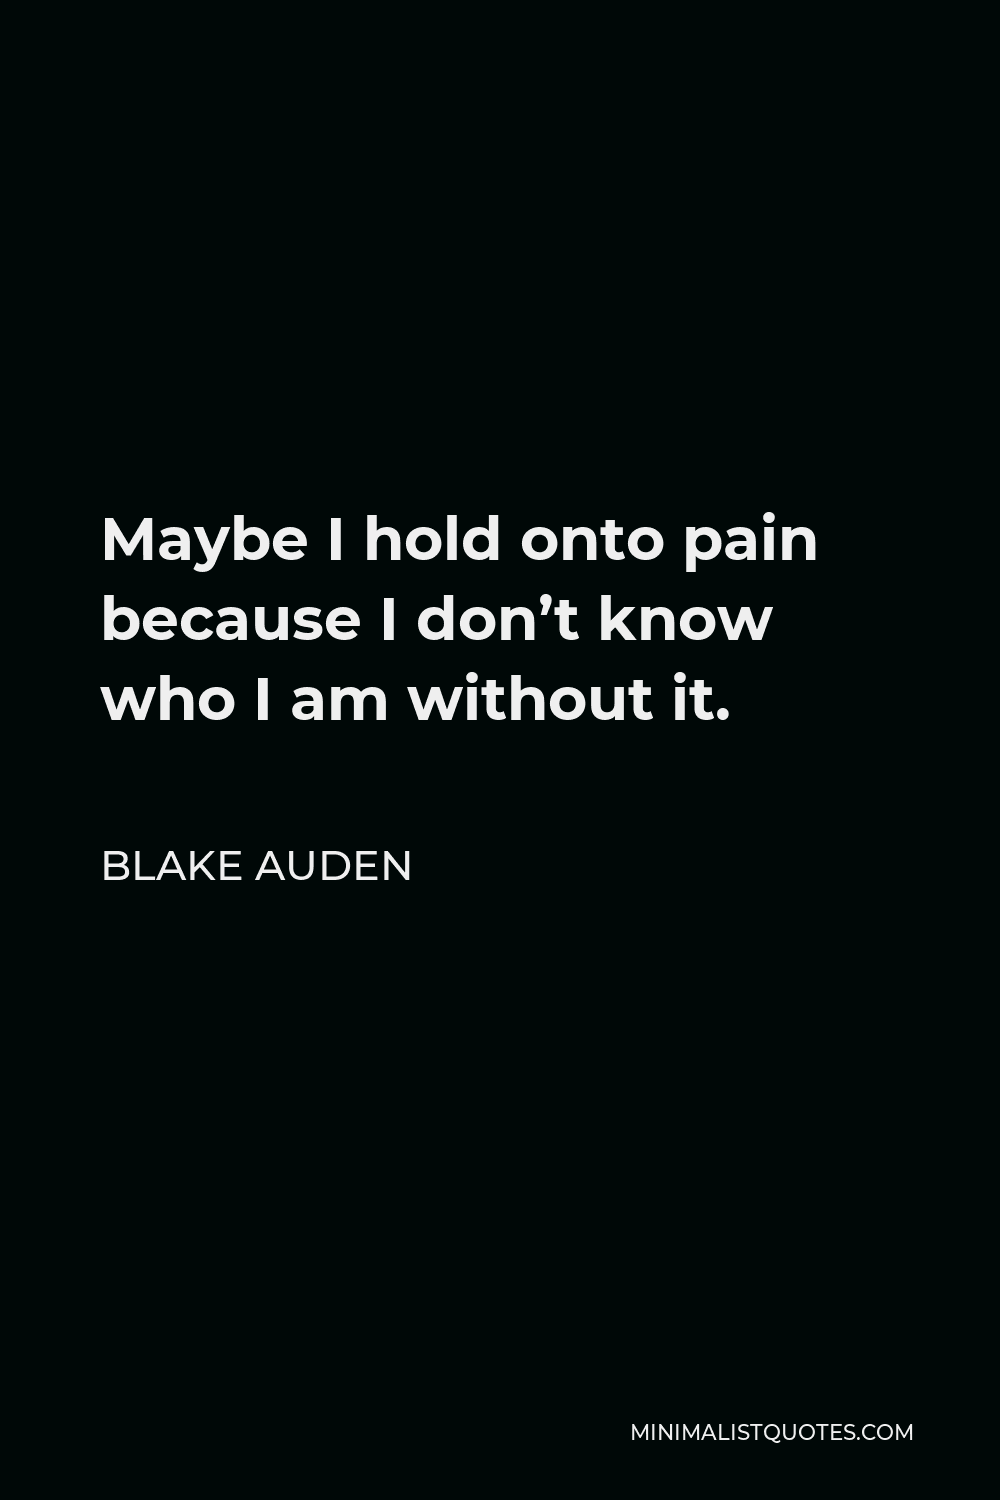 Blake Auden Quote - Maybe I hold onto pain because I don’t know who I am without it.